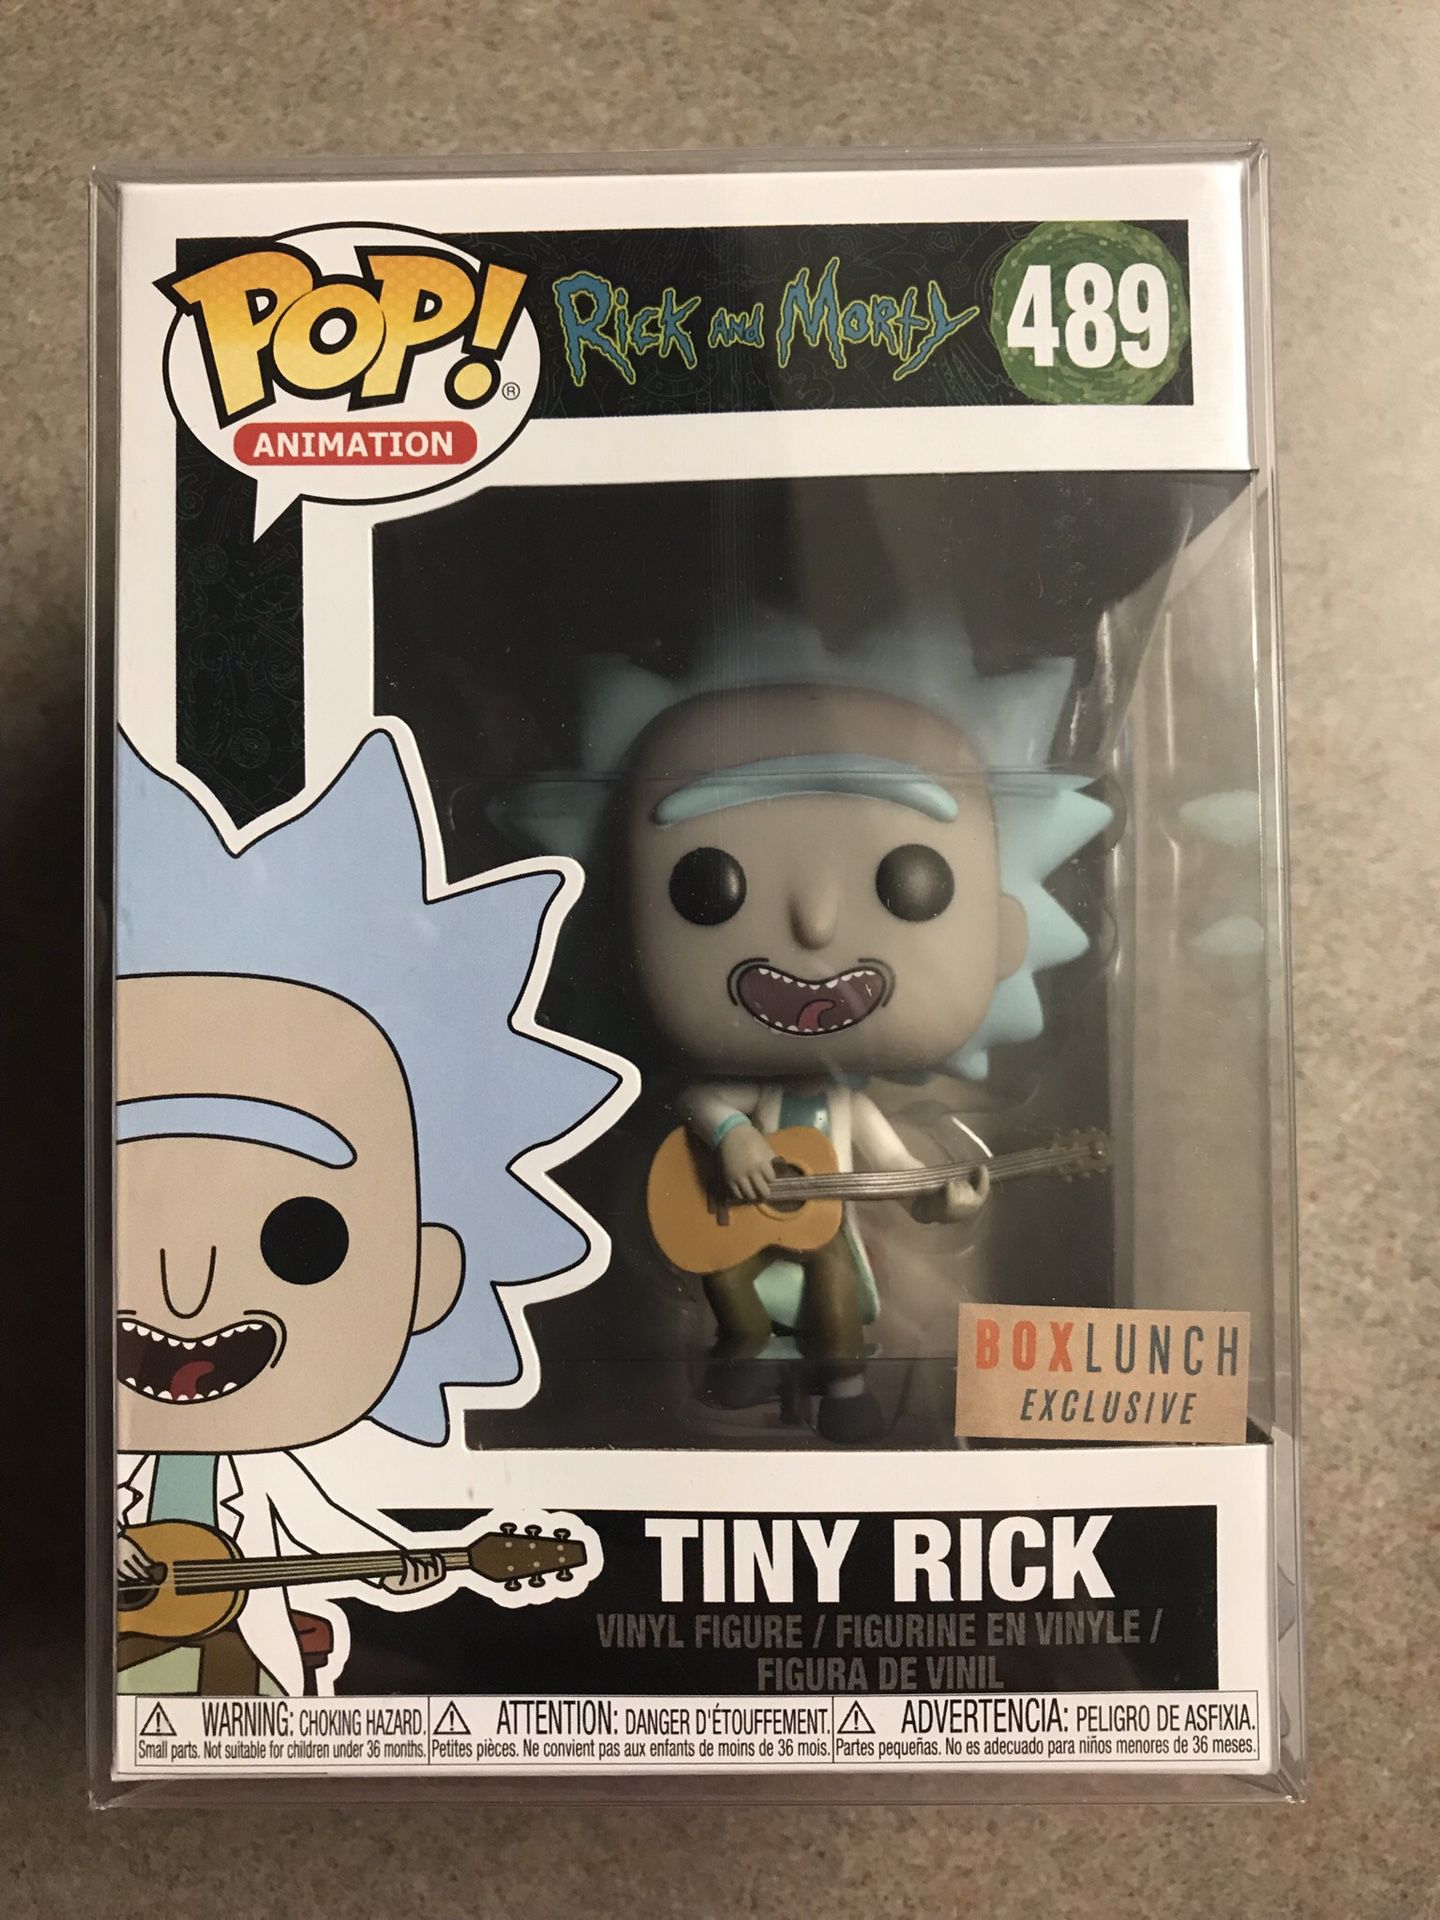 Funko Pop Tiny Rick 489 Box Lunch Exclusive Morty MINT with Protector